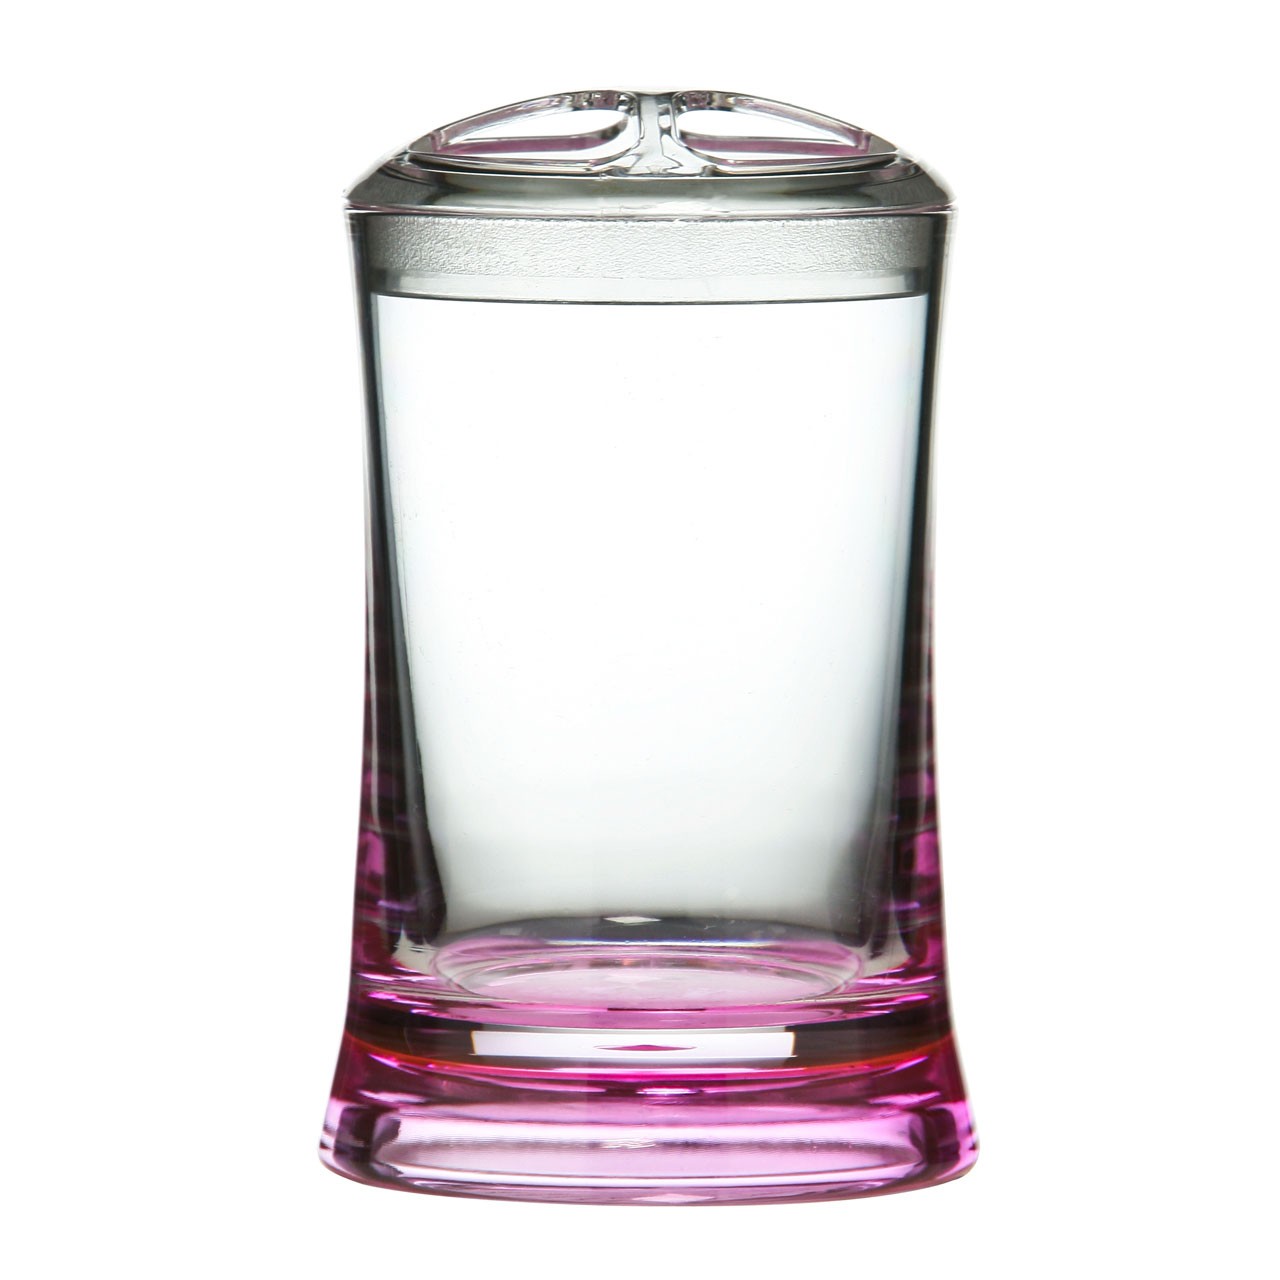 Acrylic Toothbrush Holder - Hot Pink/Clear